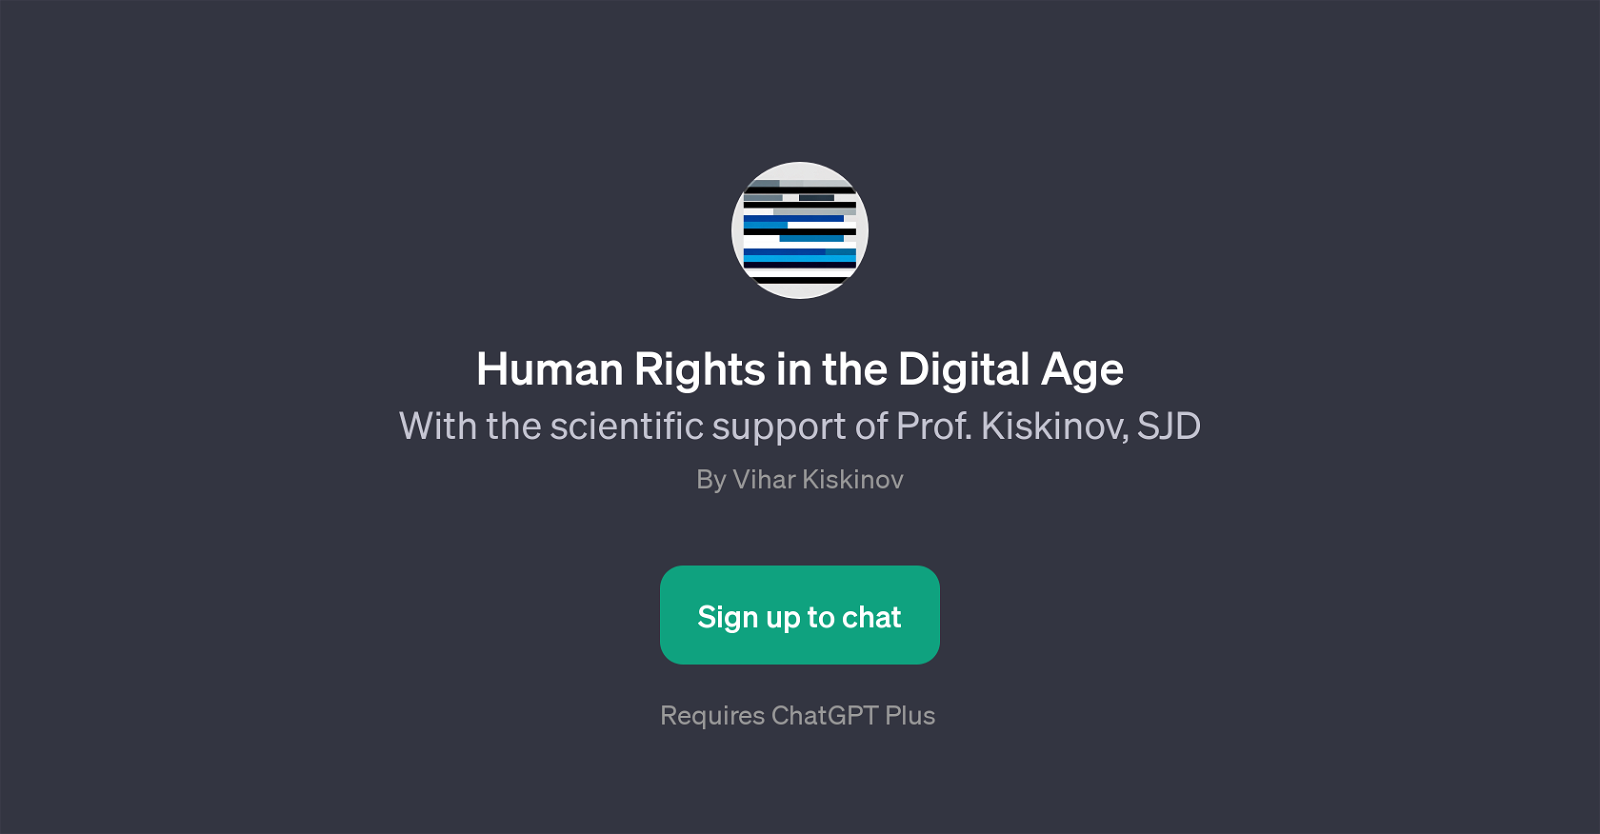 Human Rights in the Digital Age website